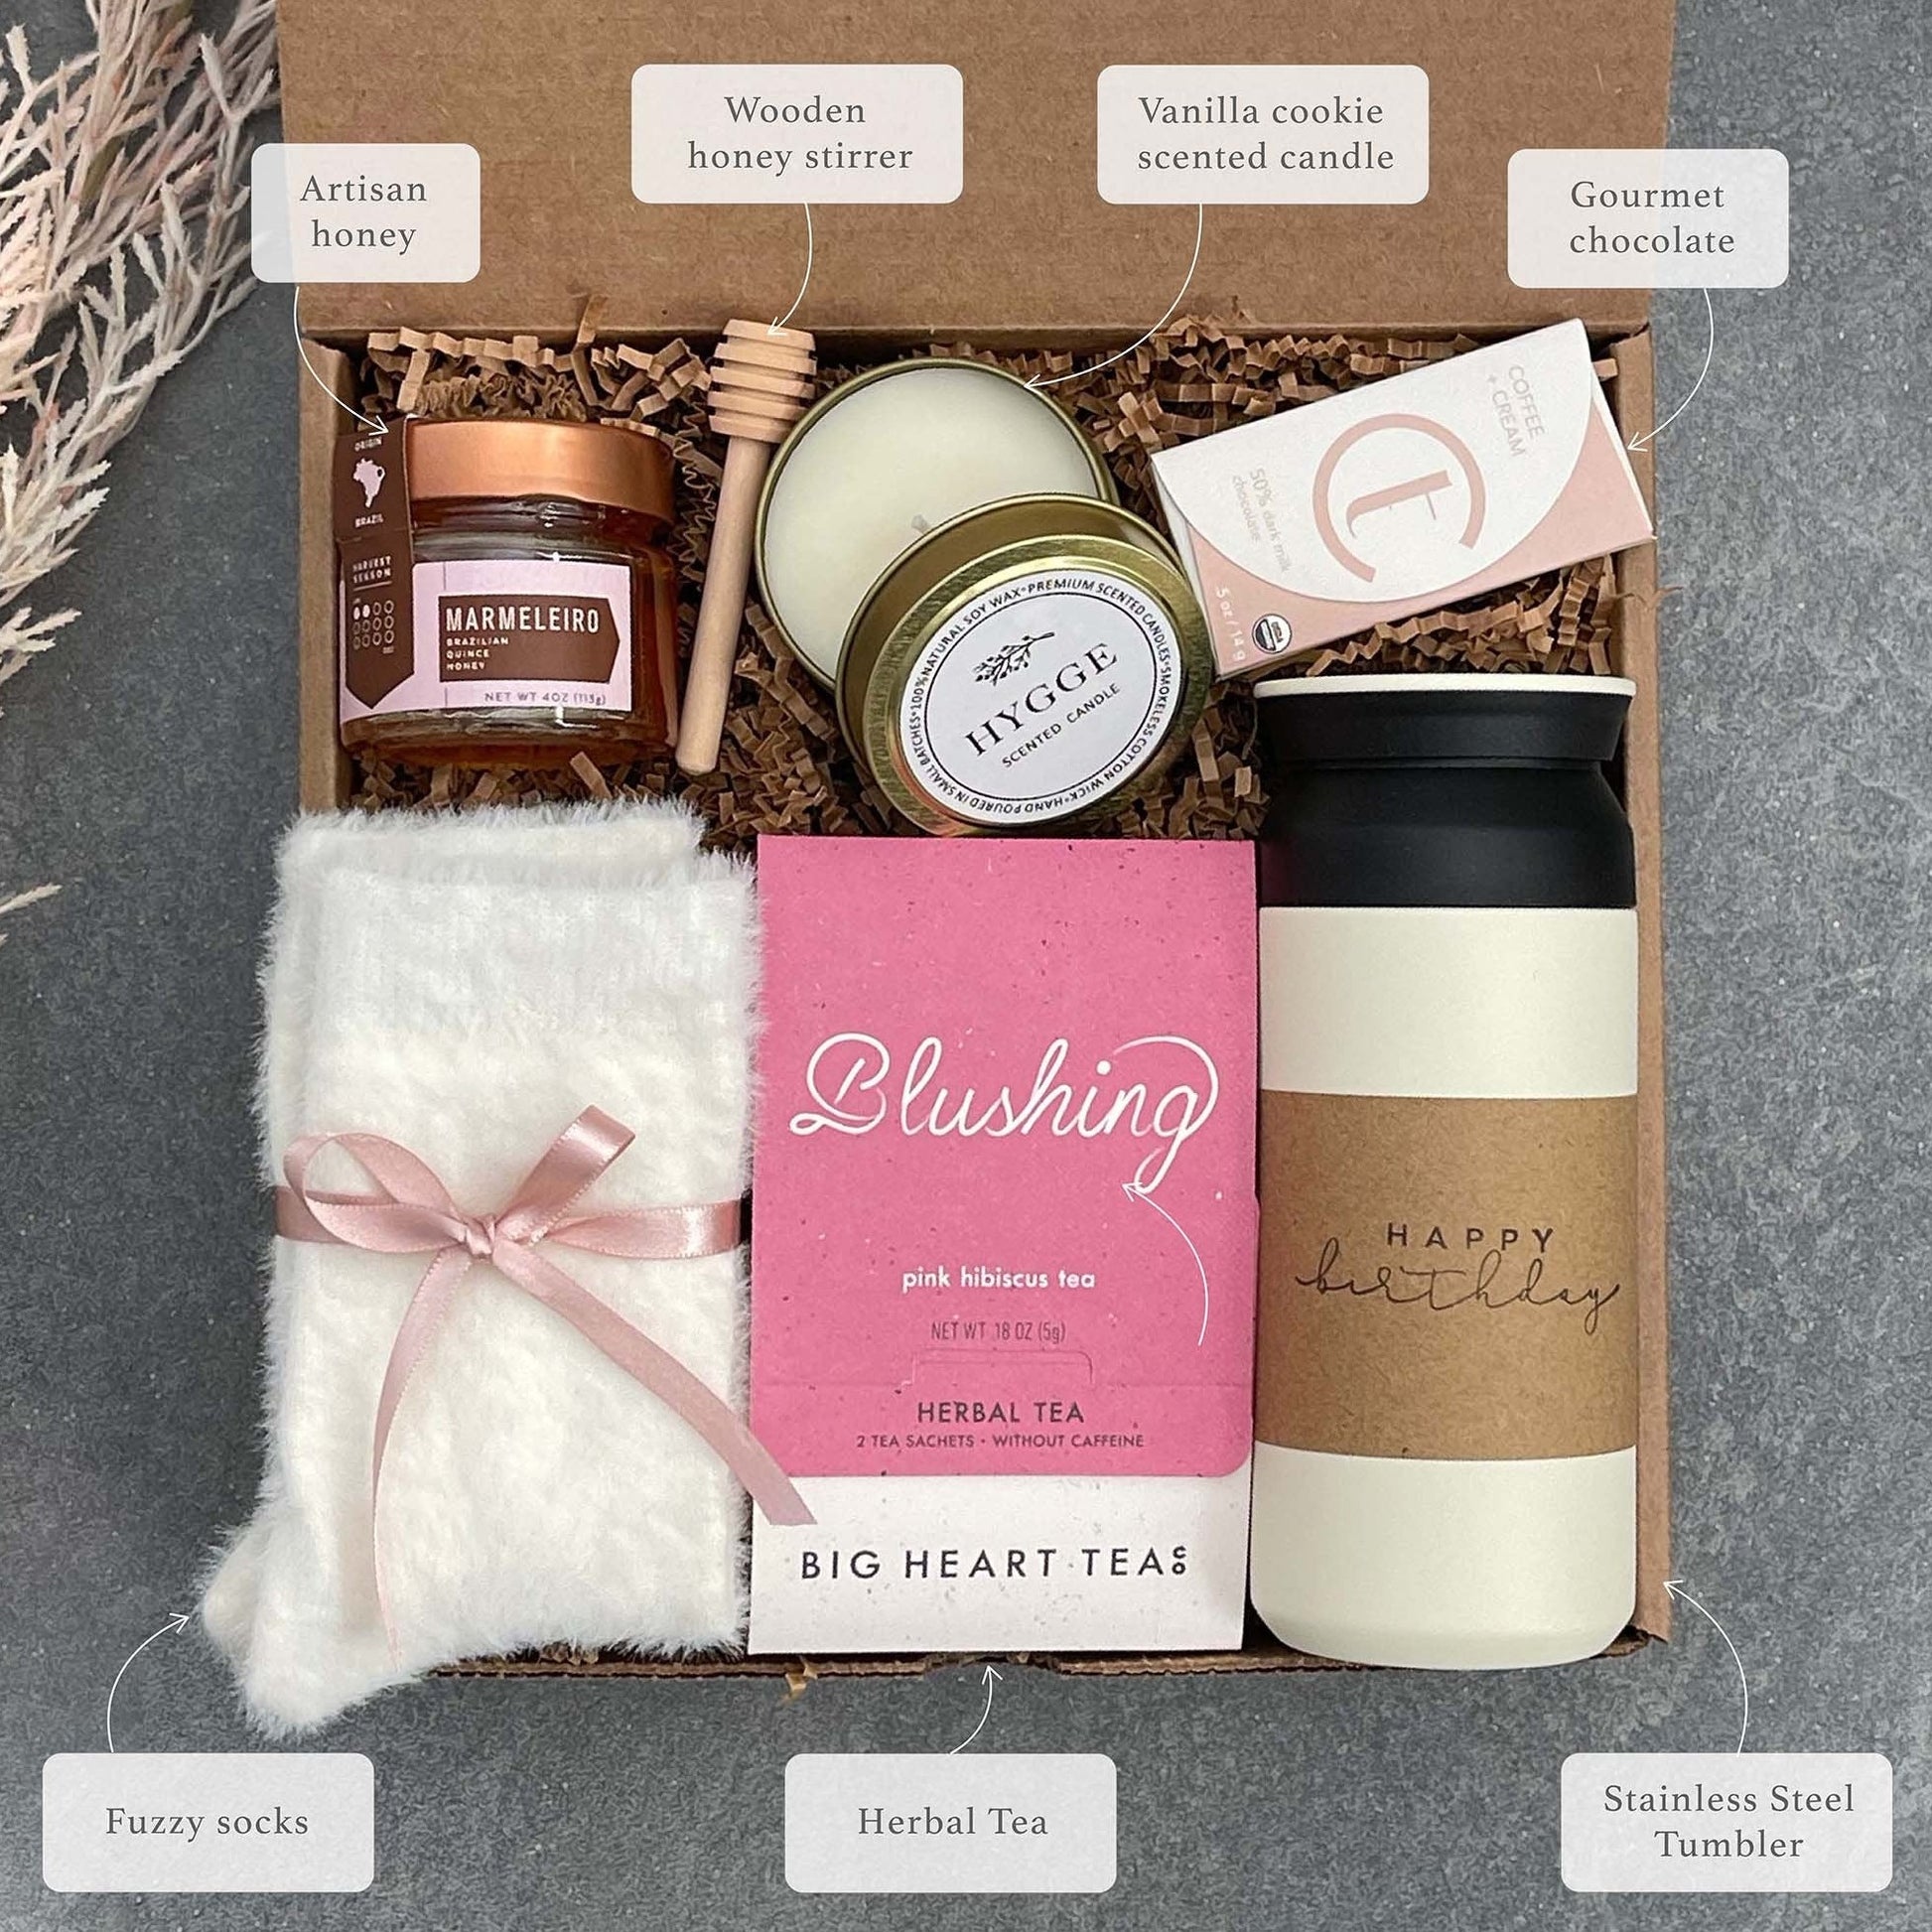  Birthday Gifts for Women - 7 Luxury Spa Gifts for Women - Self  Care Gifts for Women - Care Package for Women - Gifts for Women Birthday  Unique - Gifts for